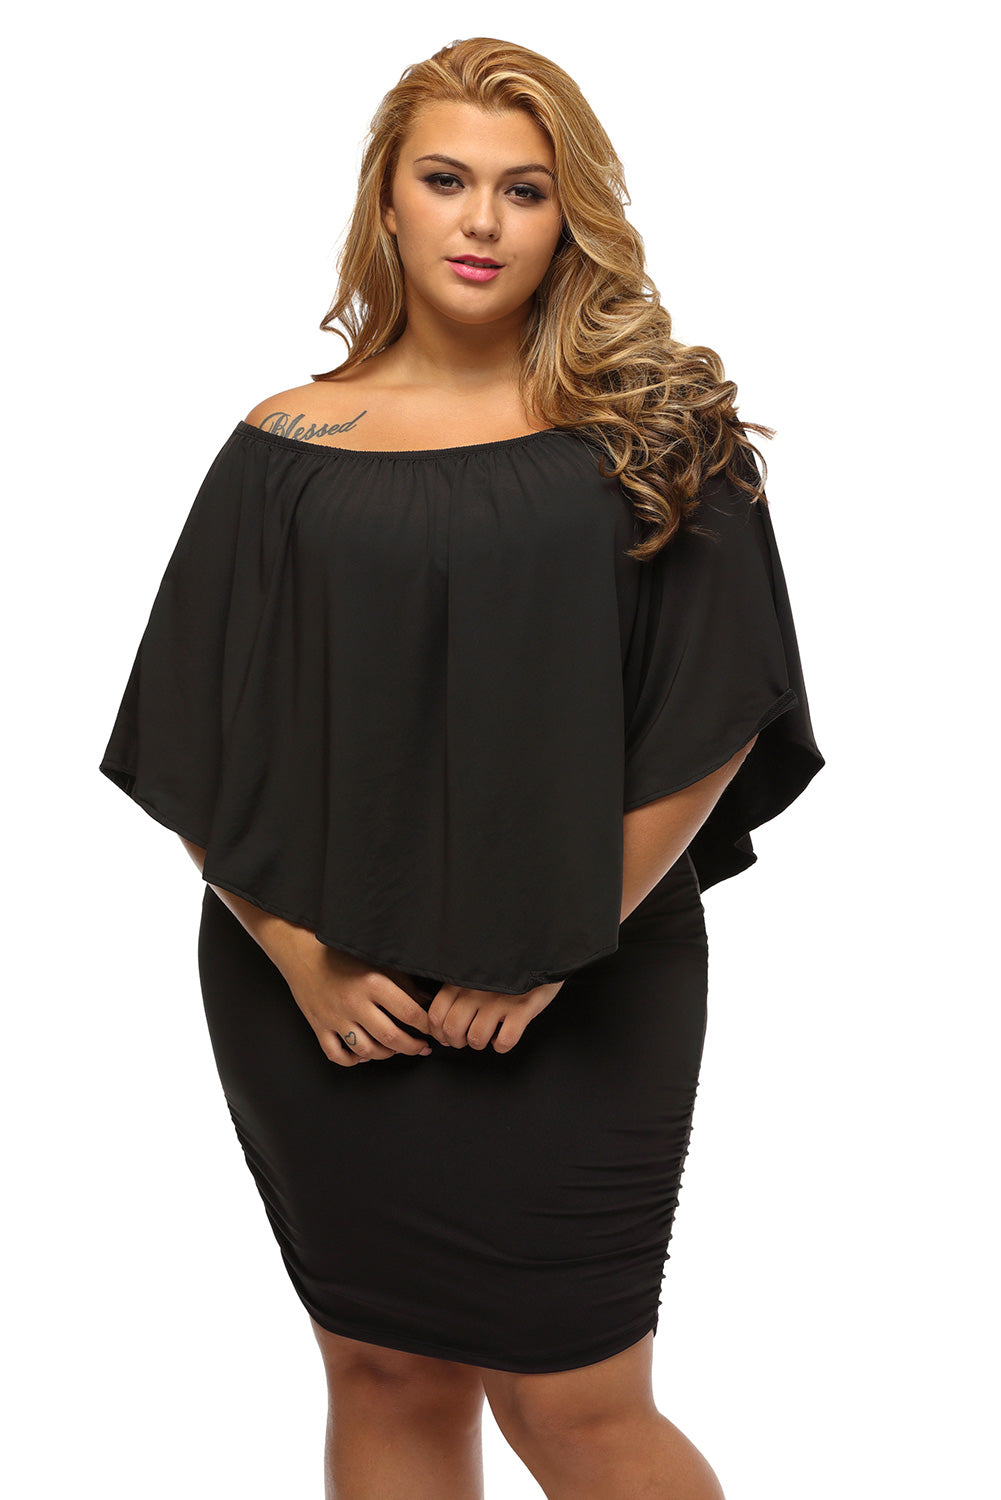 secy plus size clothing